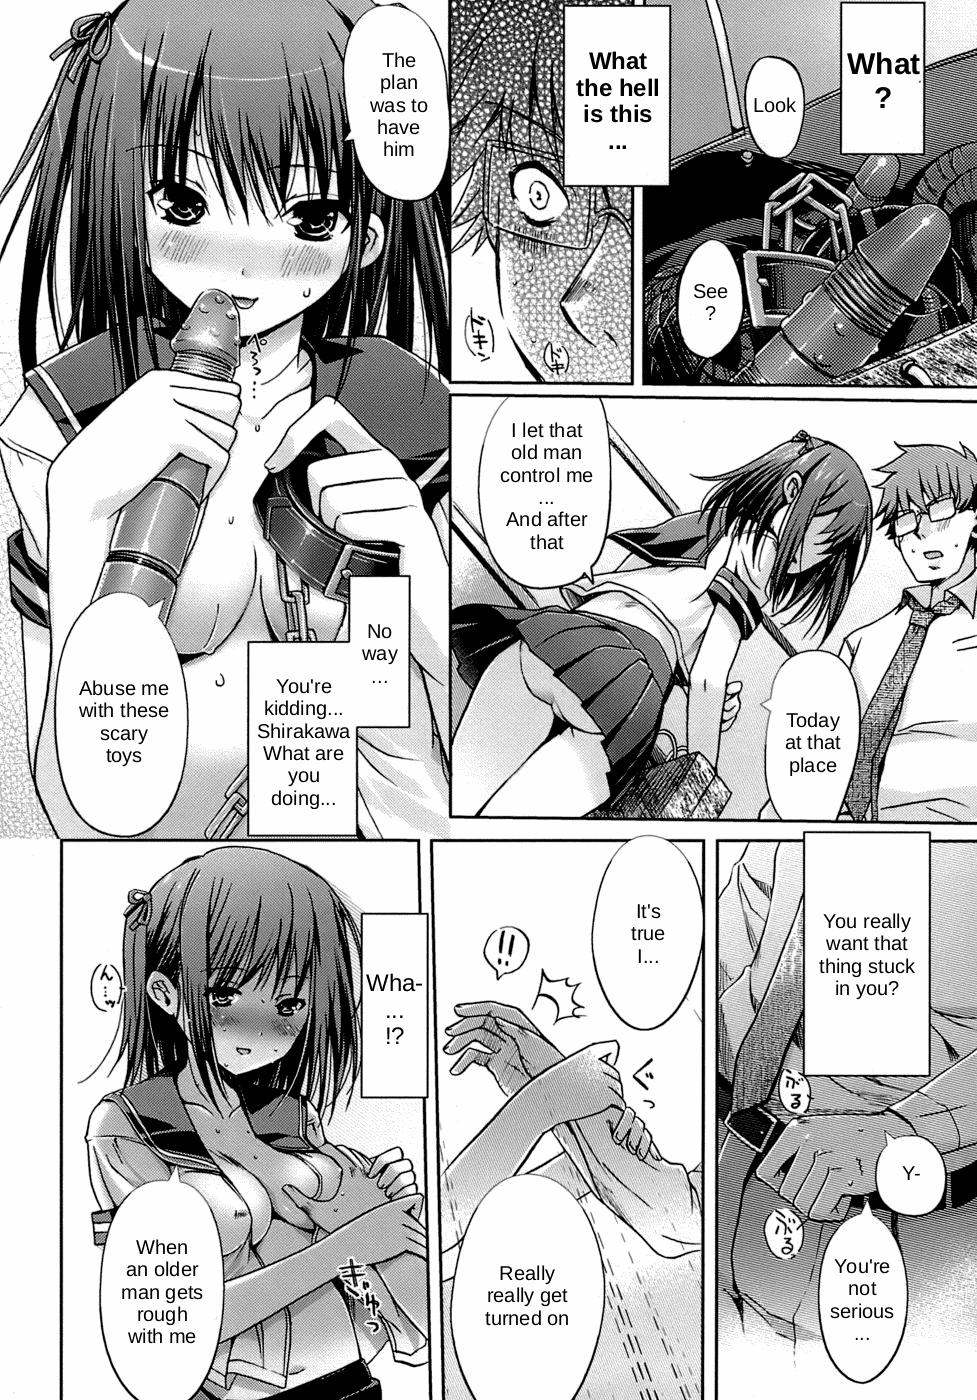 Perfect Tits Yuutousei | Honors Student Oiled - Page 4